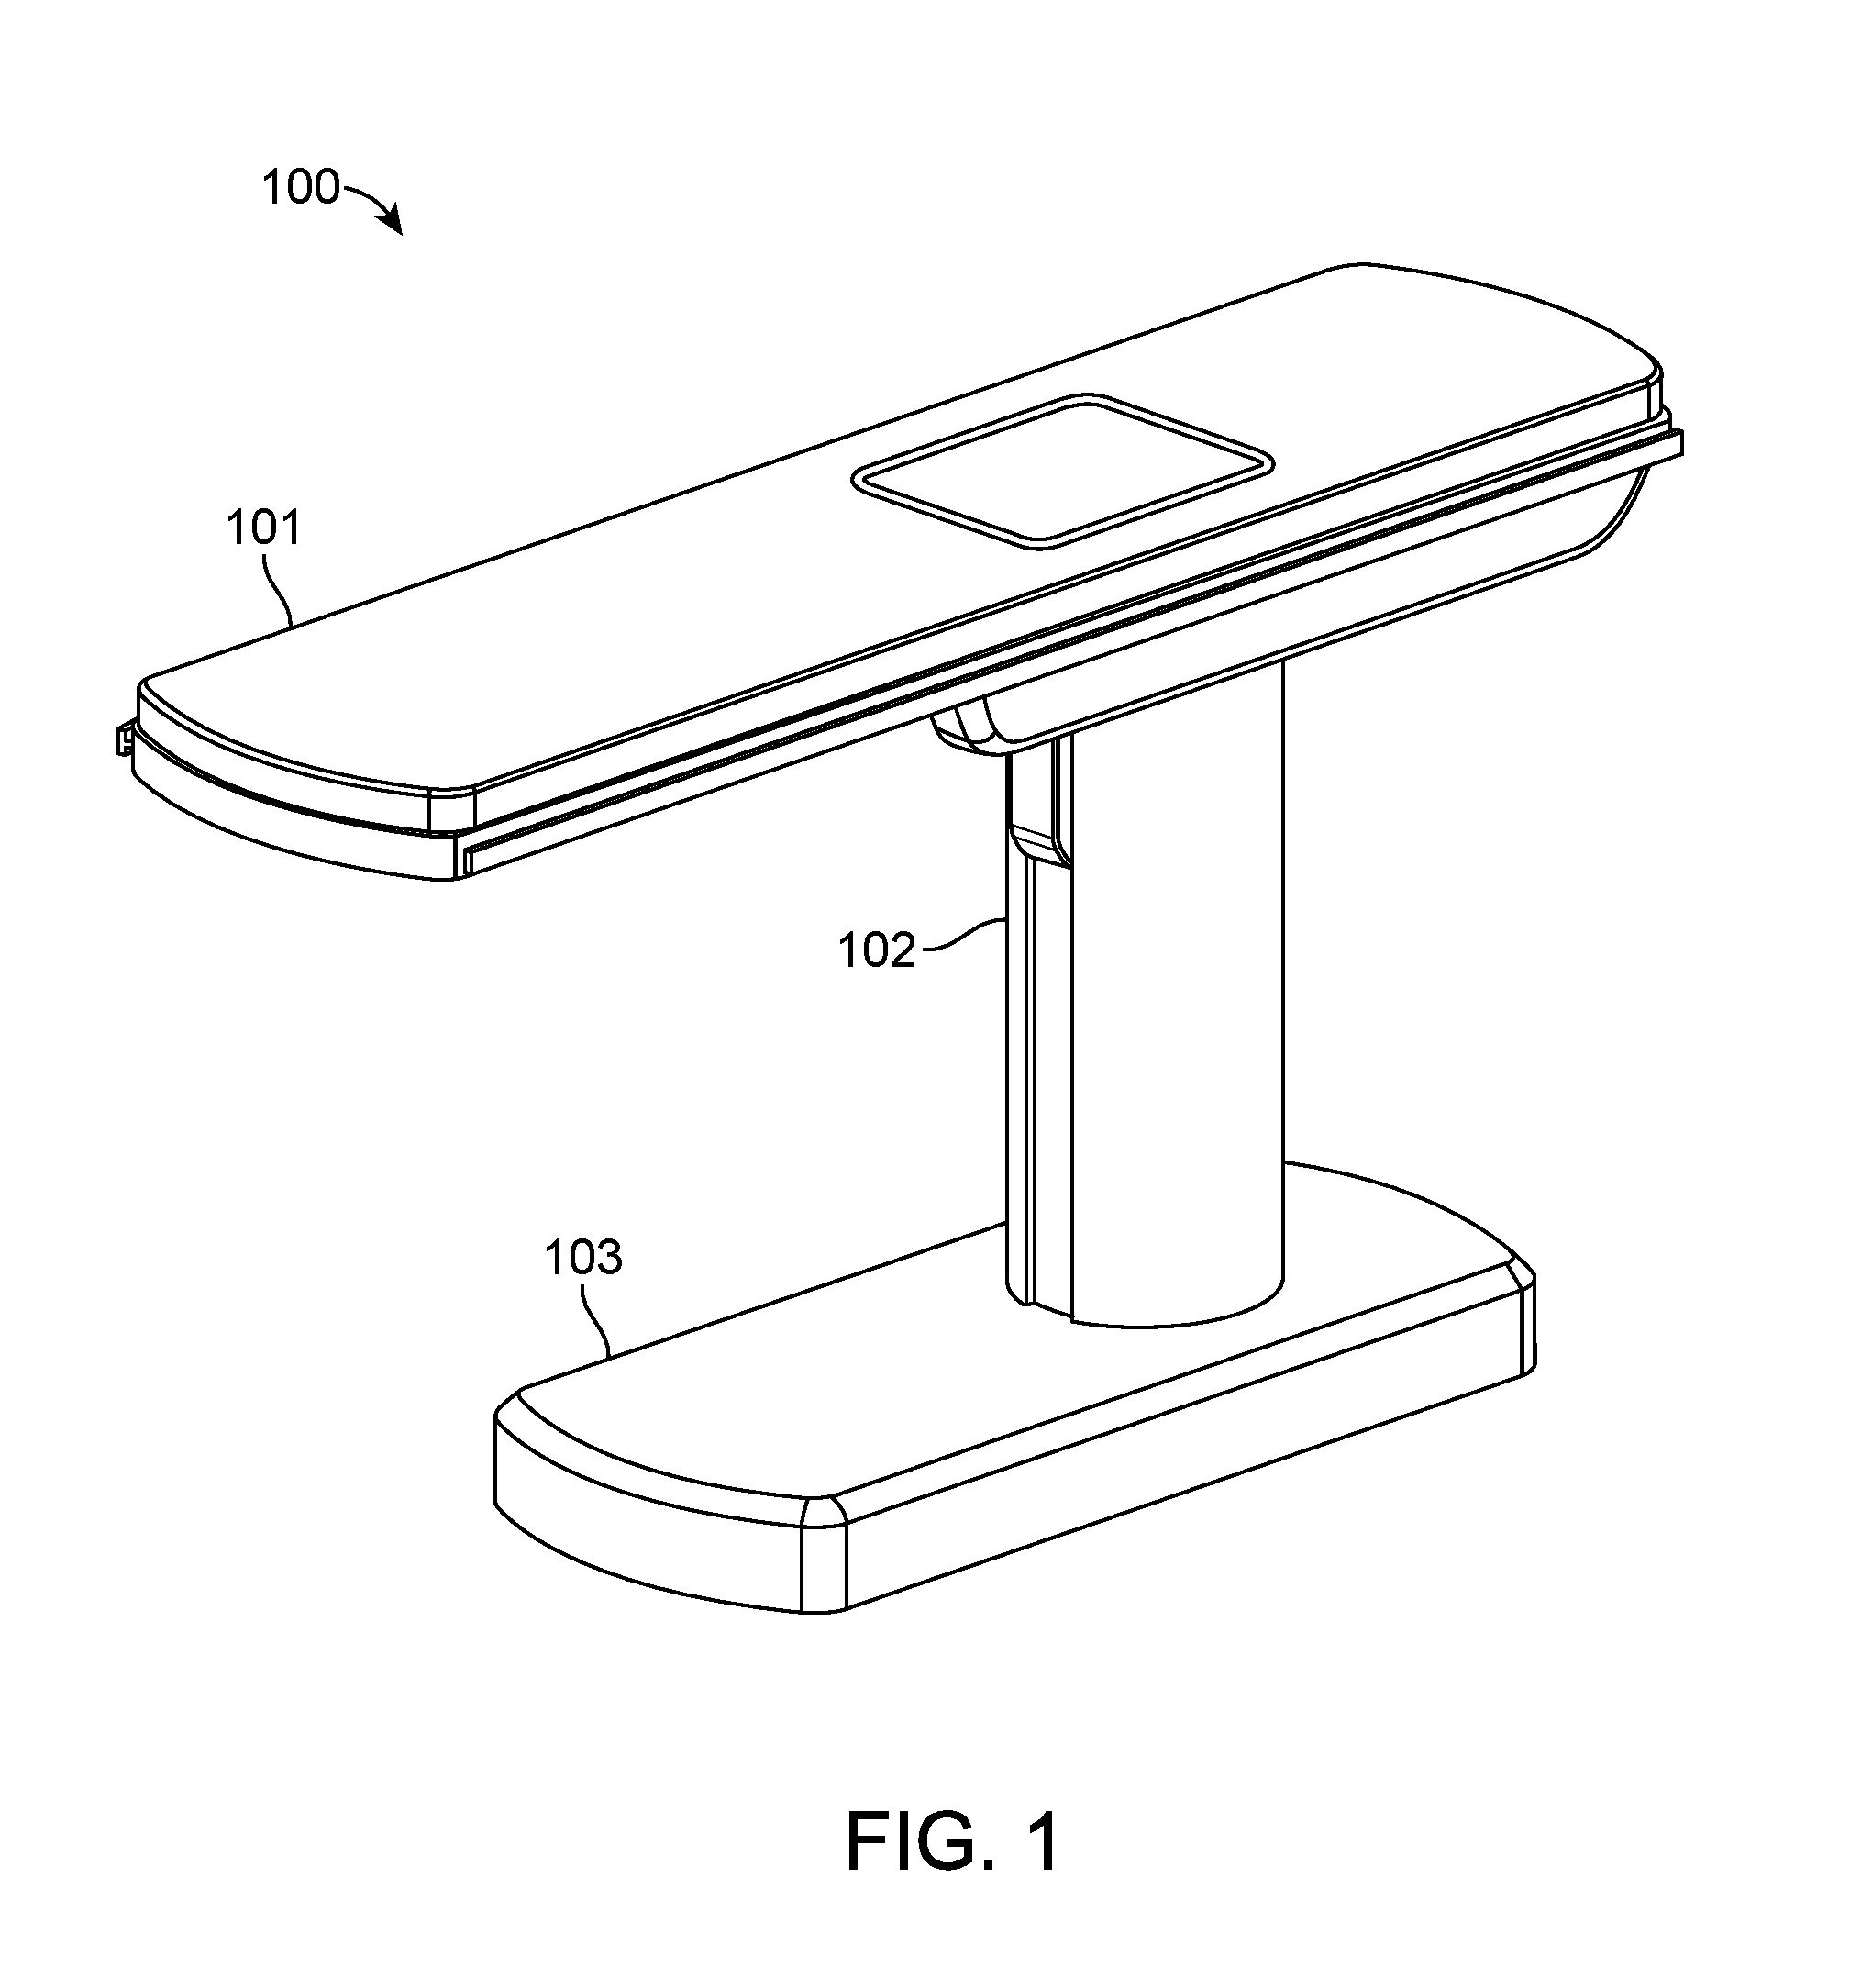 Swivel bed for a surgical robotics system